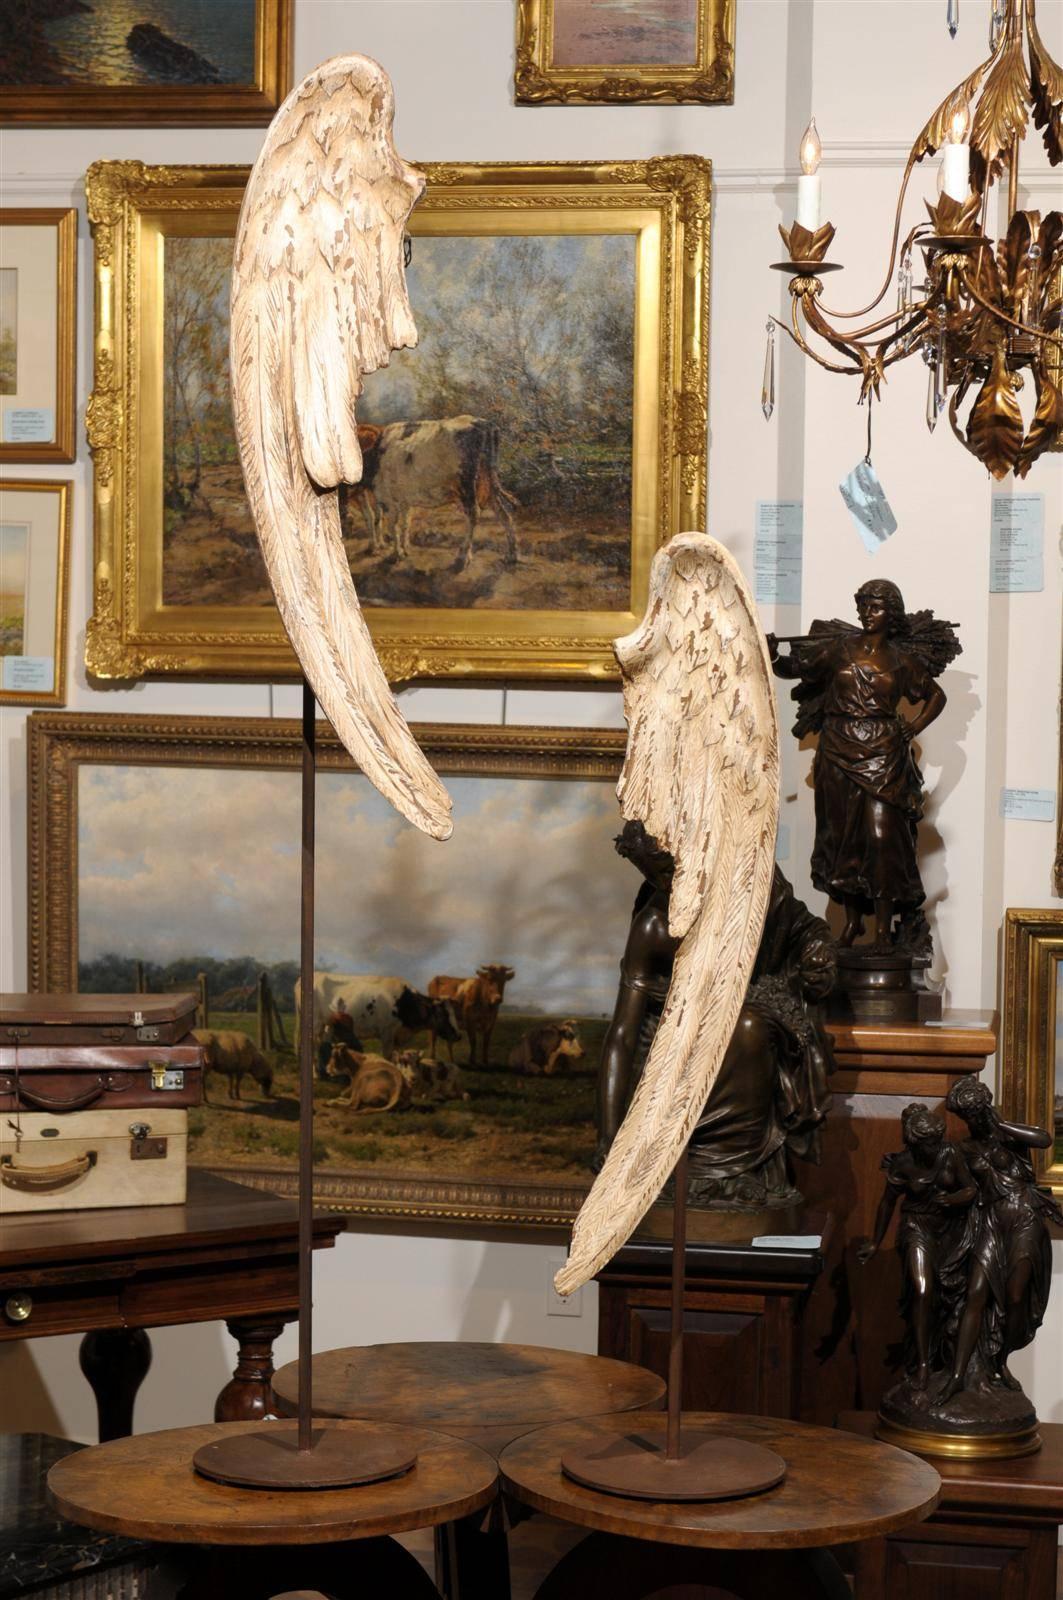 Pair of late 18th to early 19th century sculptural angel wings with unique patina, raised on iron stands of differing heights, with some original hardware still attached. These loops might have been used to attach the wings to a figure, perhaps on a